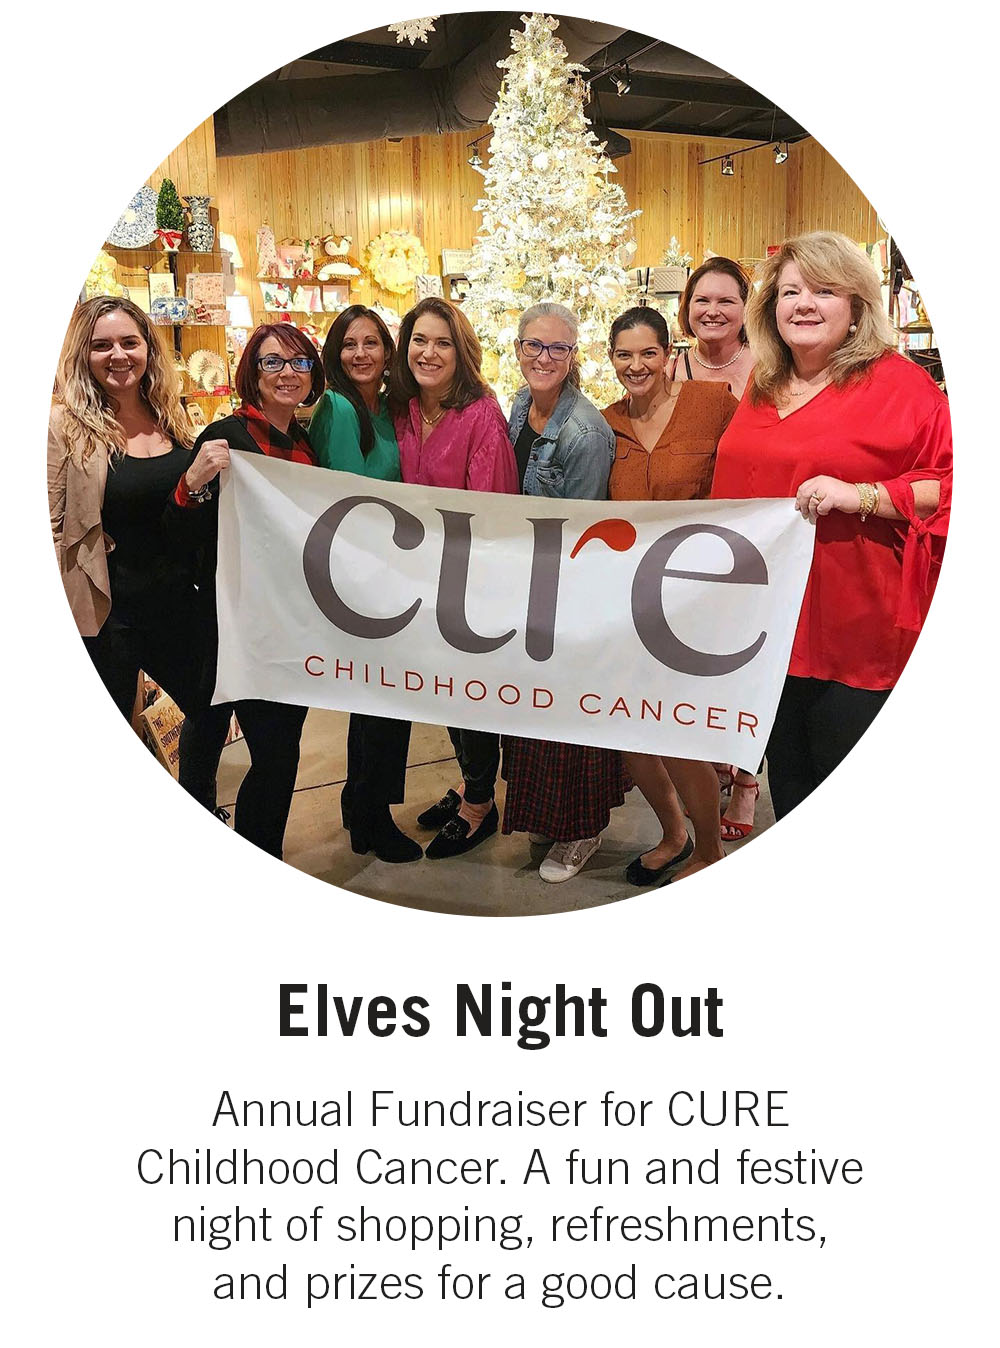 Elves Night Out Annual Fundraiser for CURE Childhood Cancer. A fun and festive night of shopping, refreshments, and prizes for a good cause.